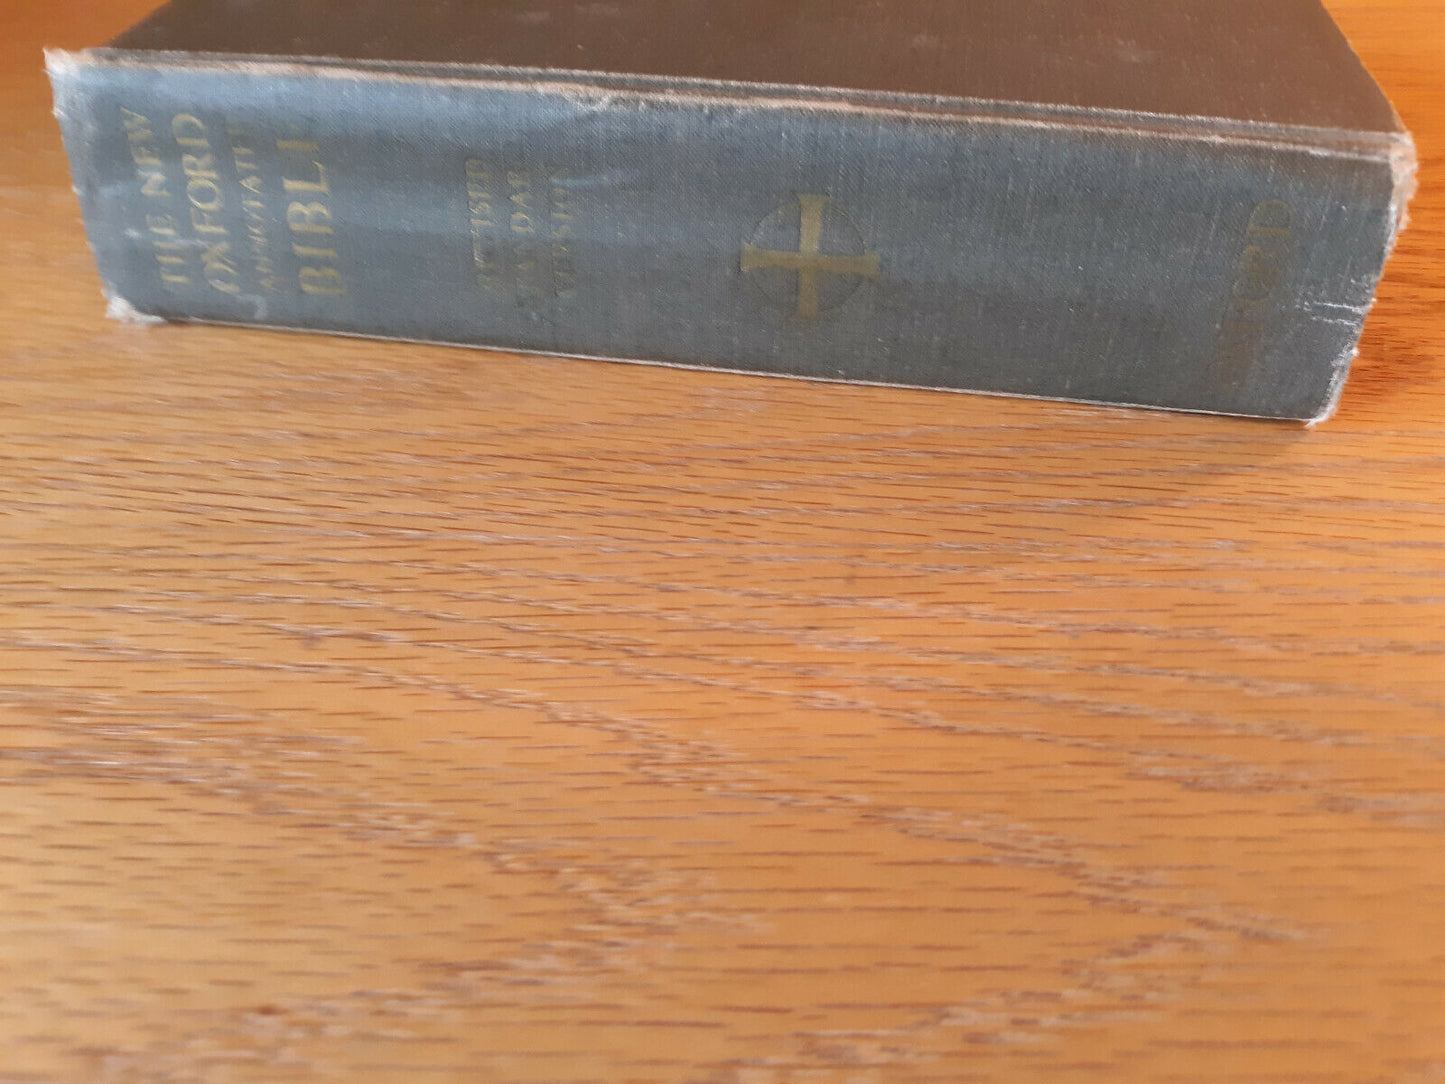 The New Oxford Annotated Bible The Holy Bible,Revised Standard Version,HC-1973